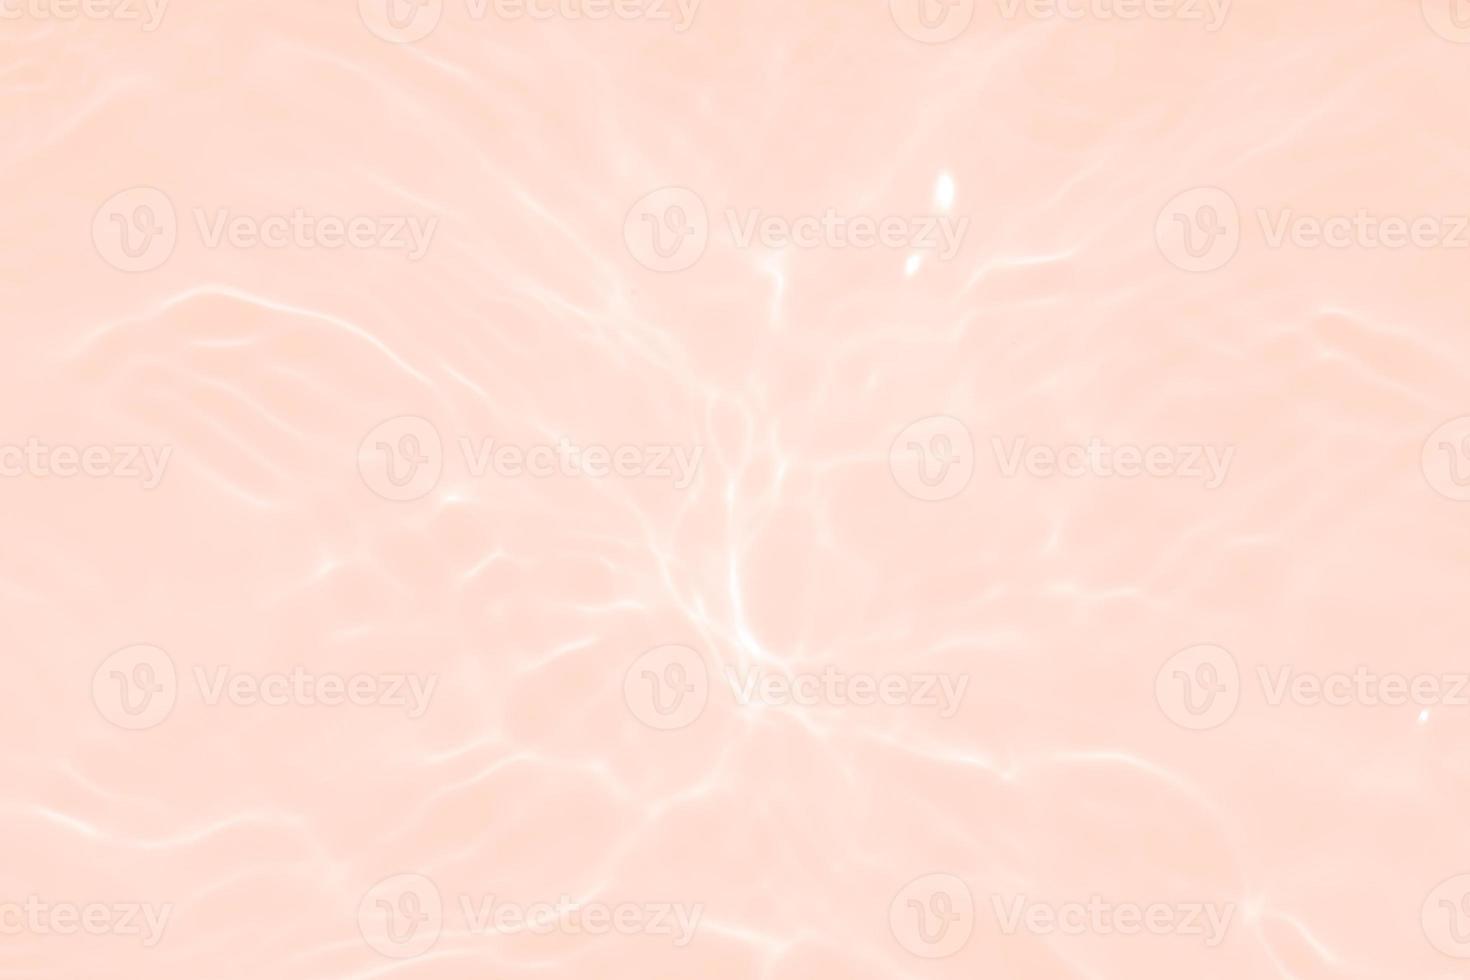 Defocus blurred transparent pink colored clear calm water surface texture with splash, bubble. Shining pink water ripple background. Surface of water in swimming pool. Tropical pink water textures. photo